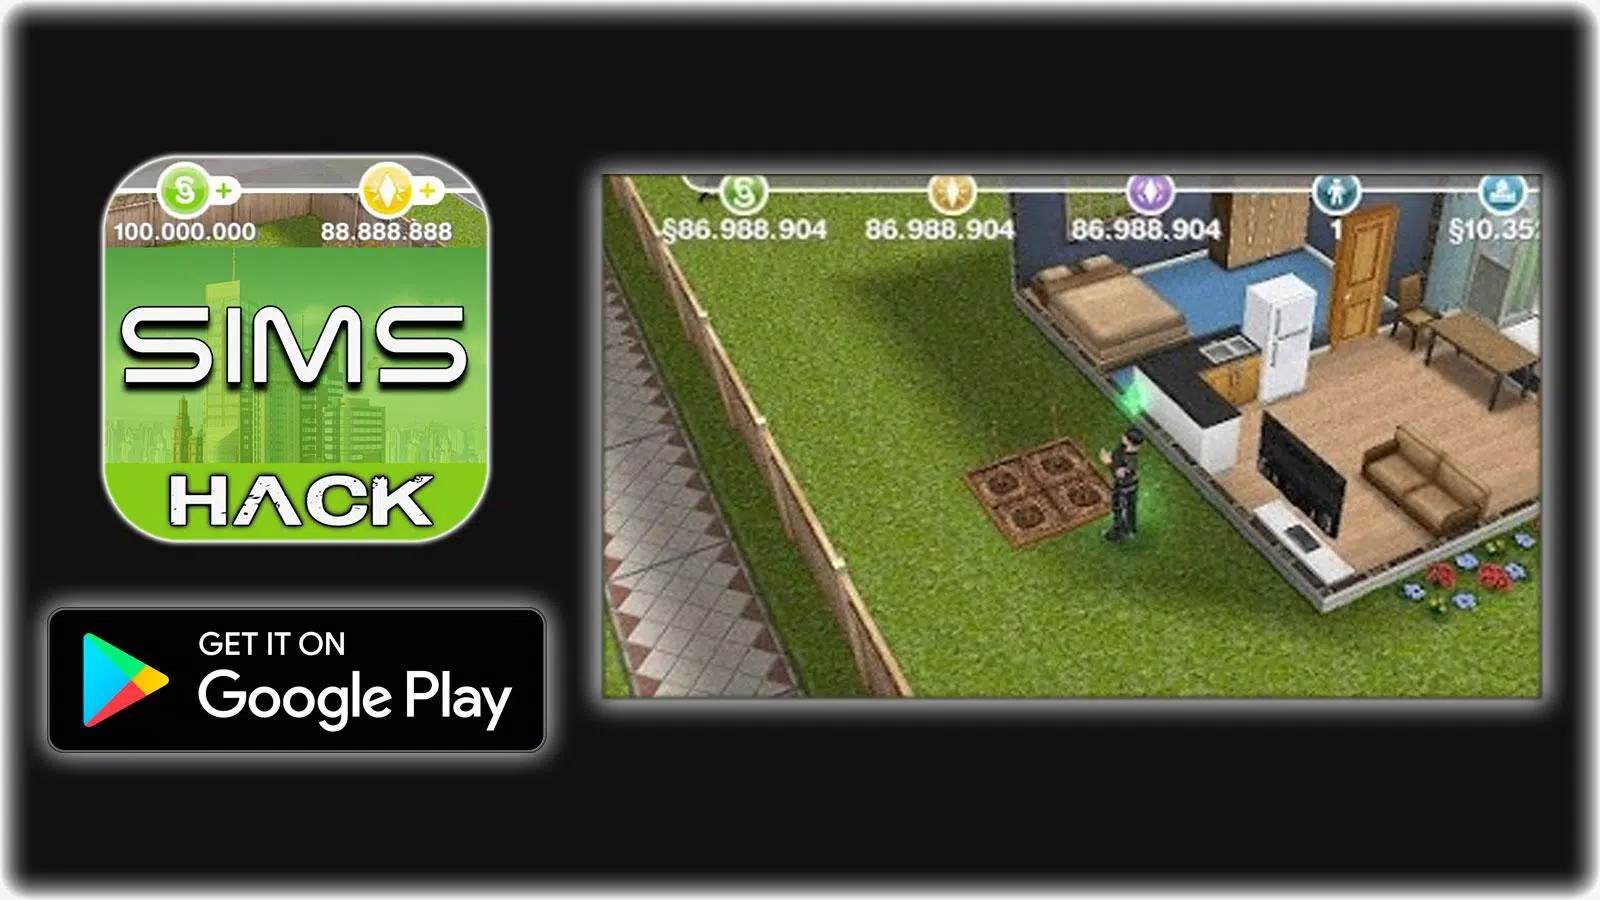 The Sims Mobile Game, Cheats, Mods, APK, Hacks, IOS, APP, Android, Tips,  Guide Unofficial